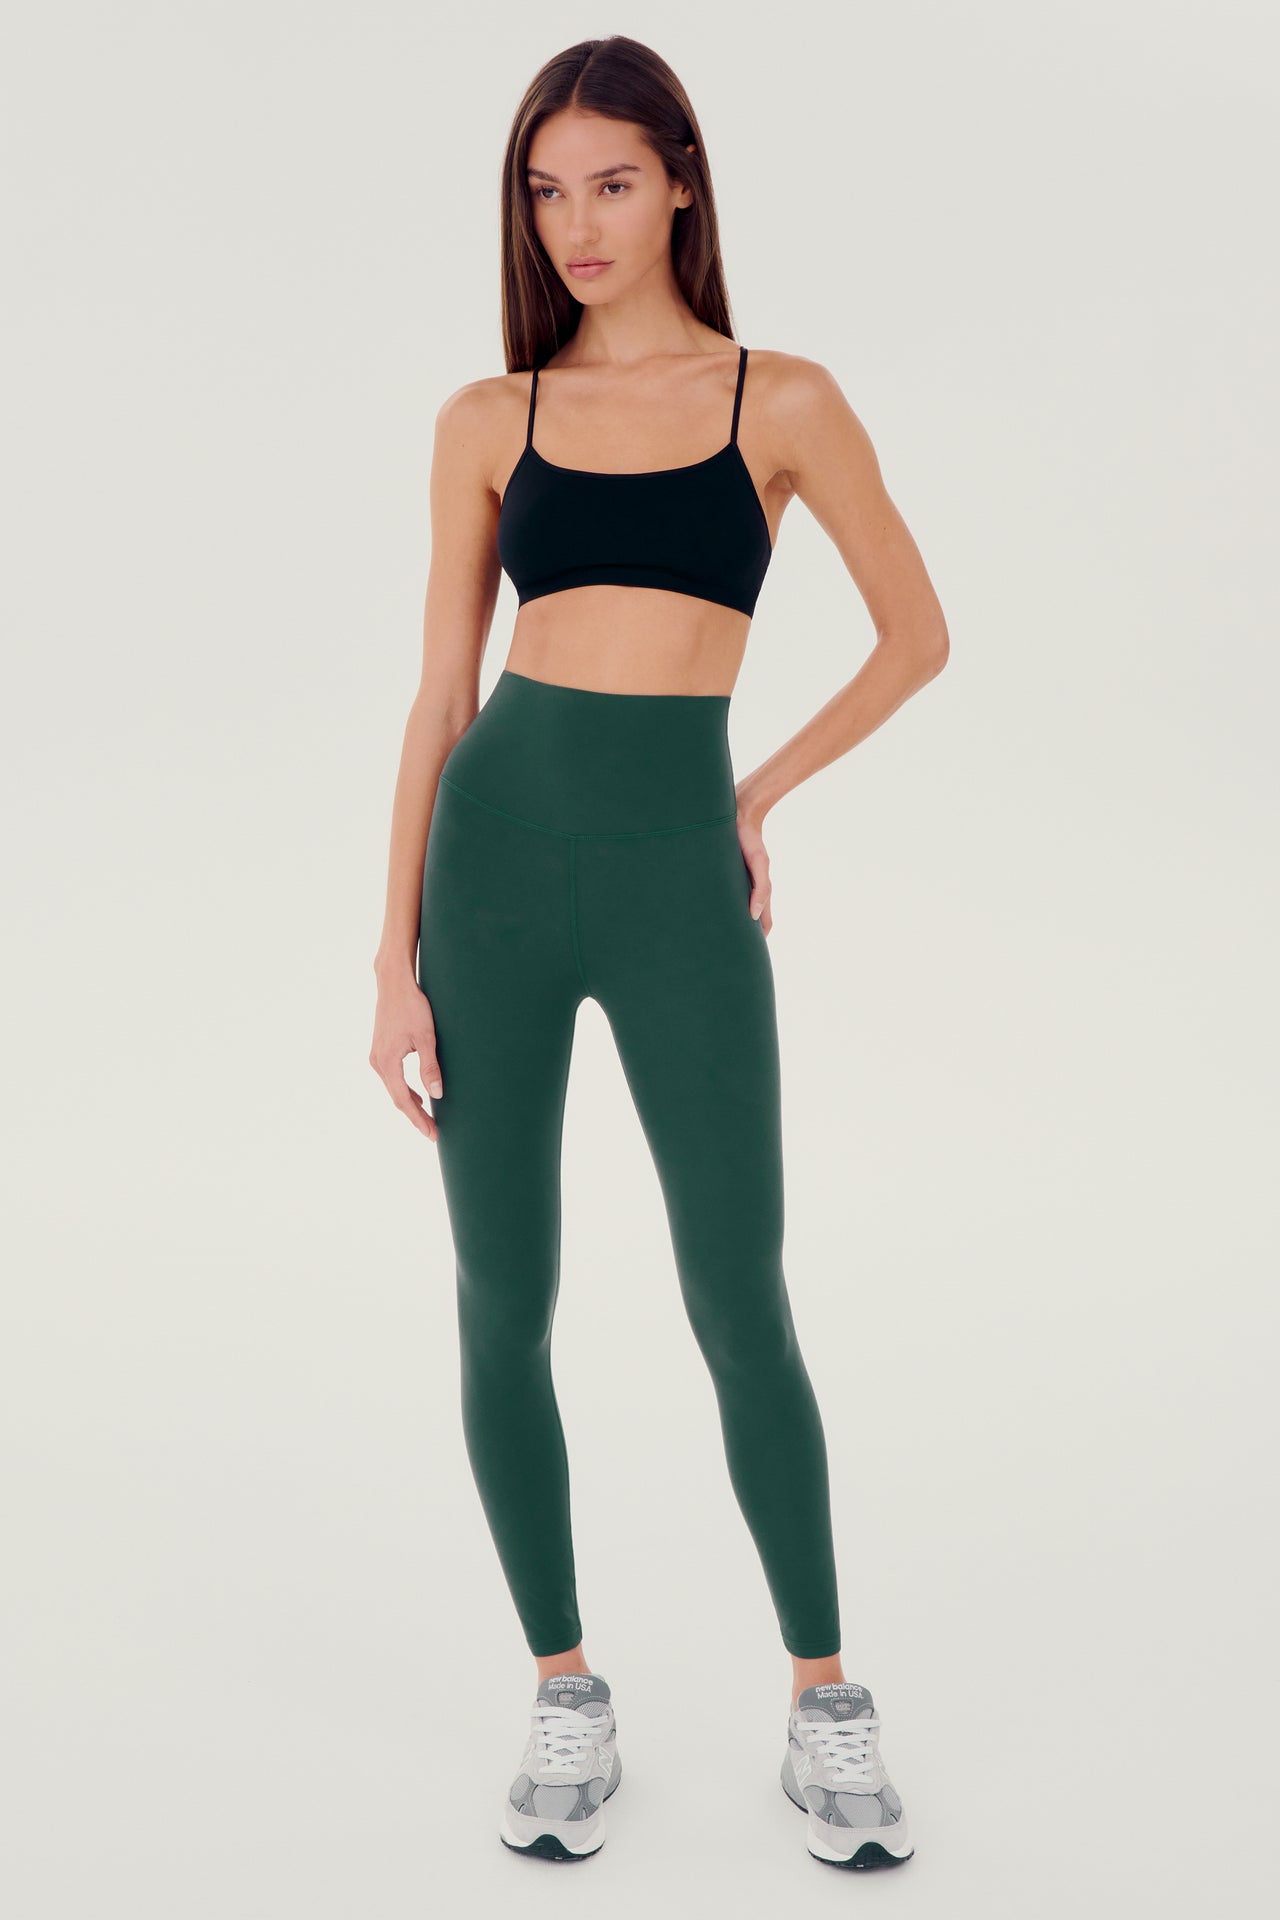 Full front view of girl wearing dark green leggings right above the ankle with black sports bra and grey shoes